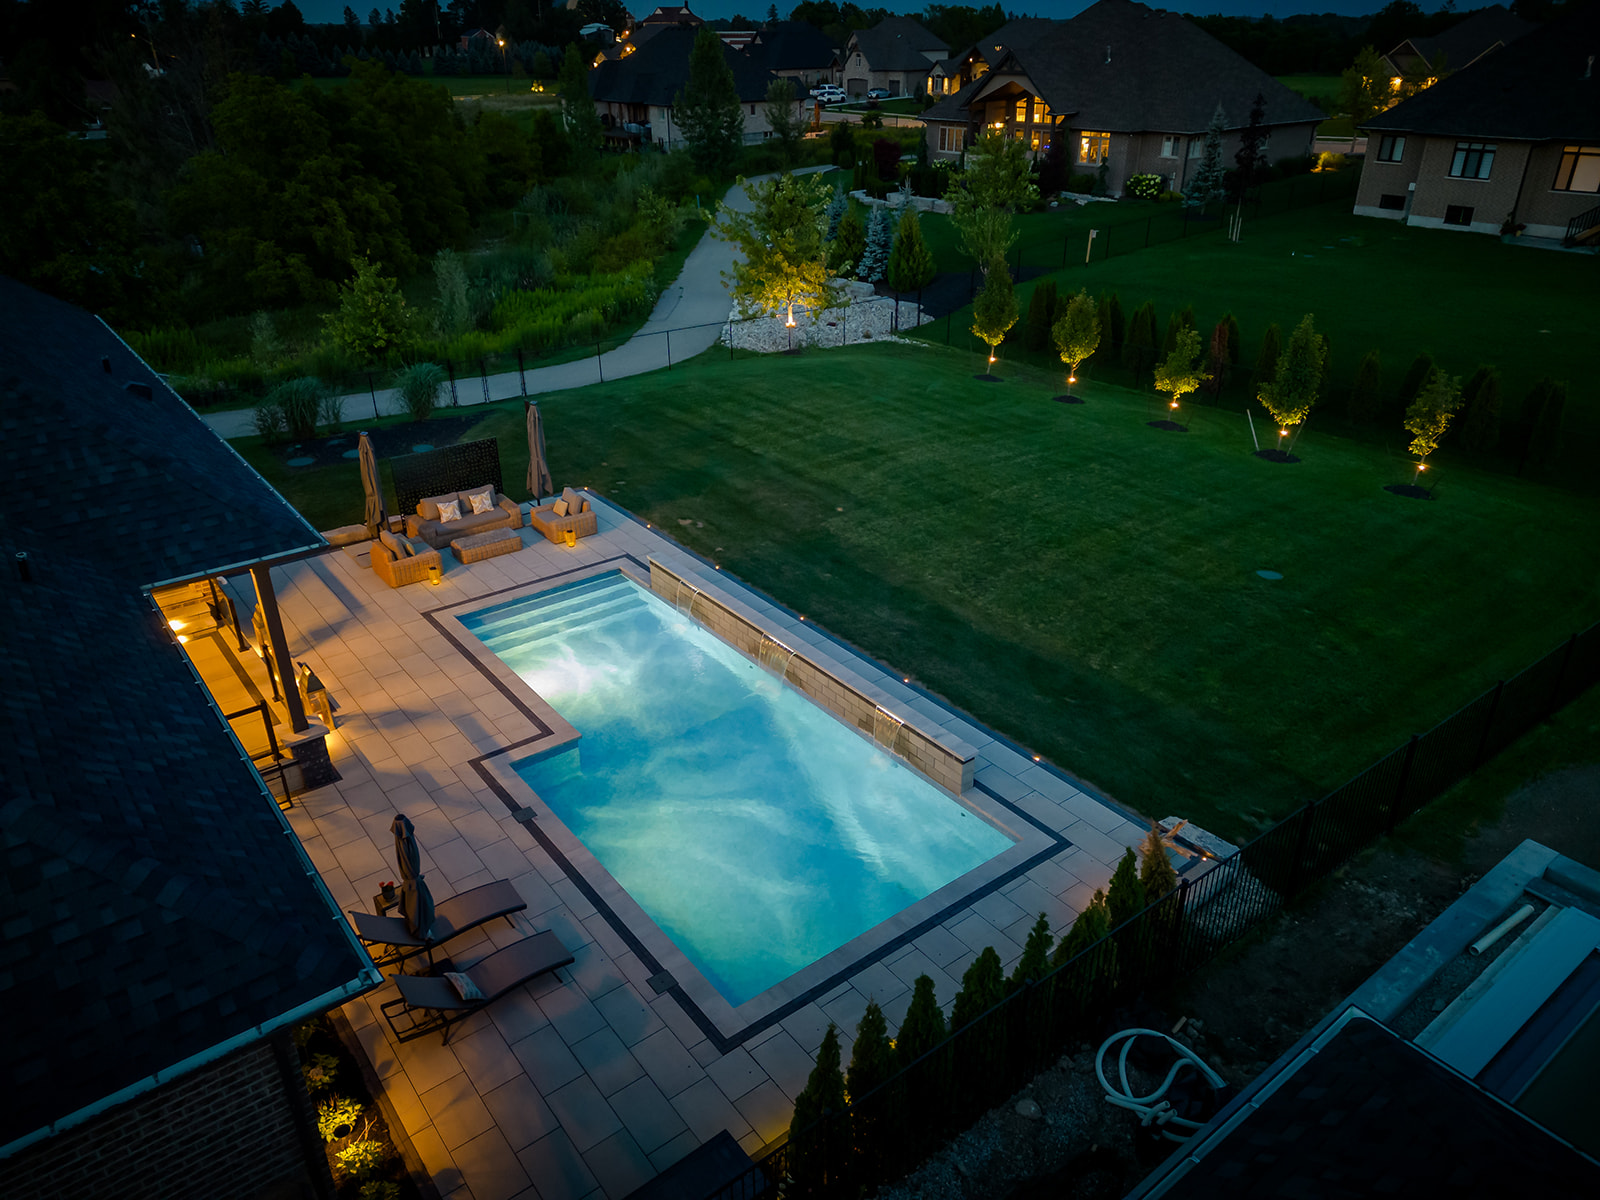 An inground pool with lights on in the water and on the house.